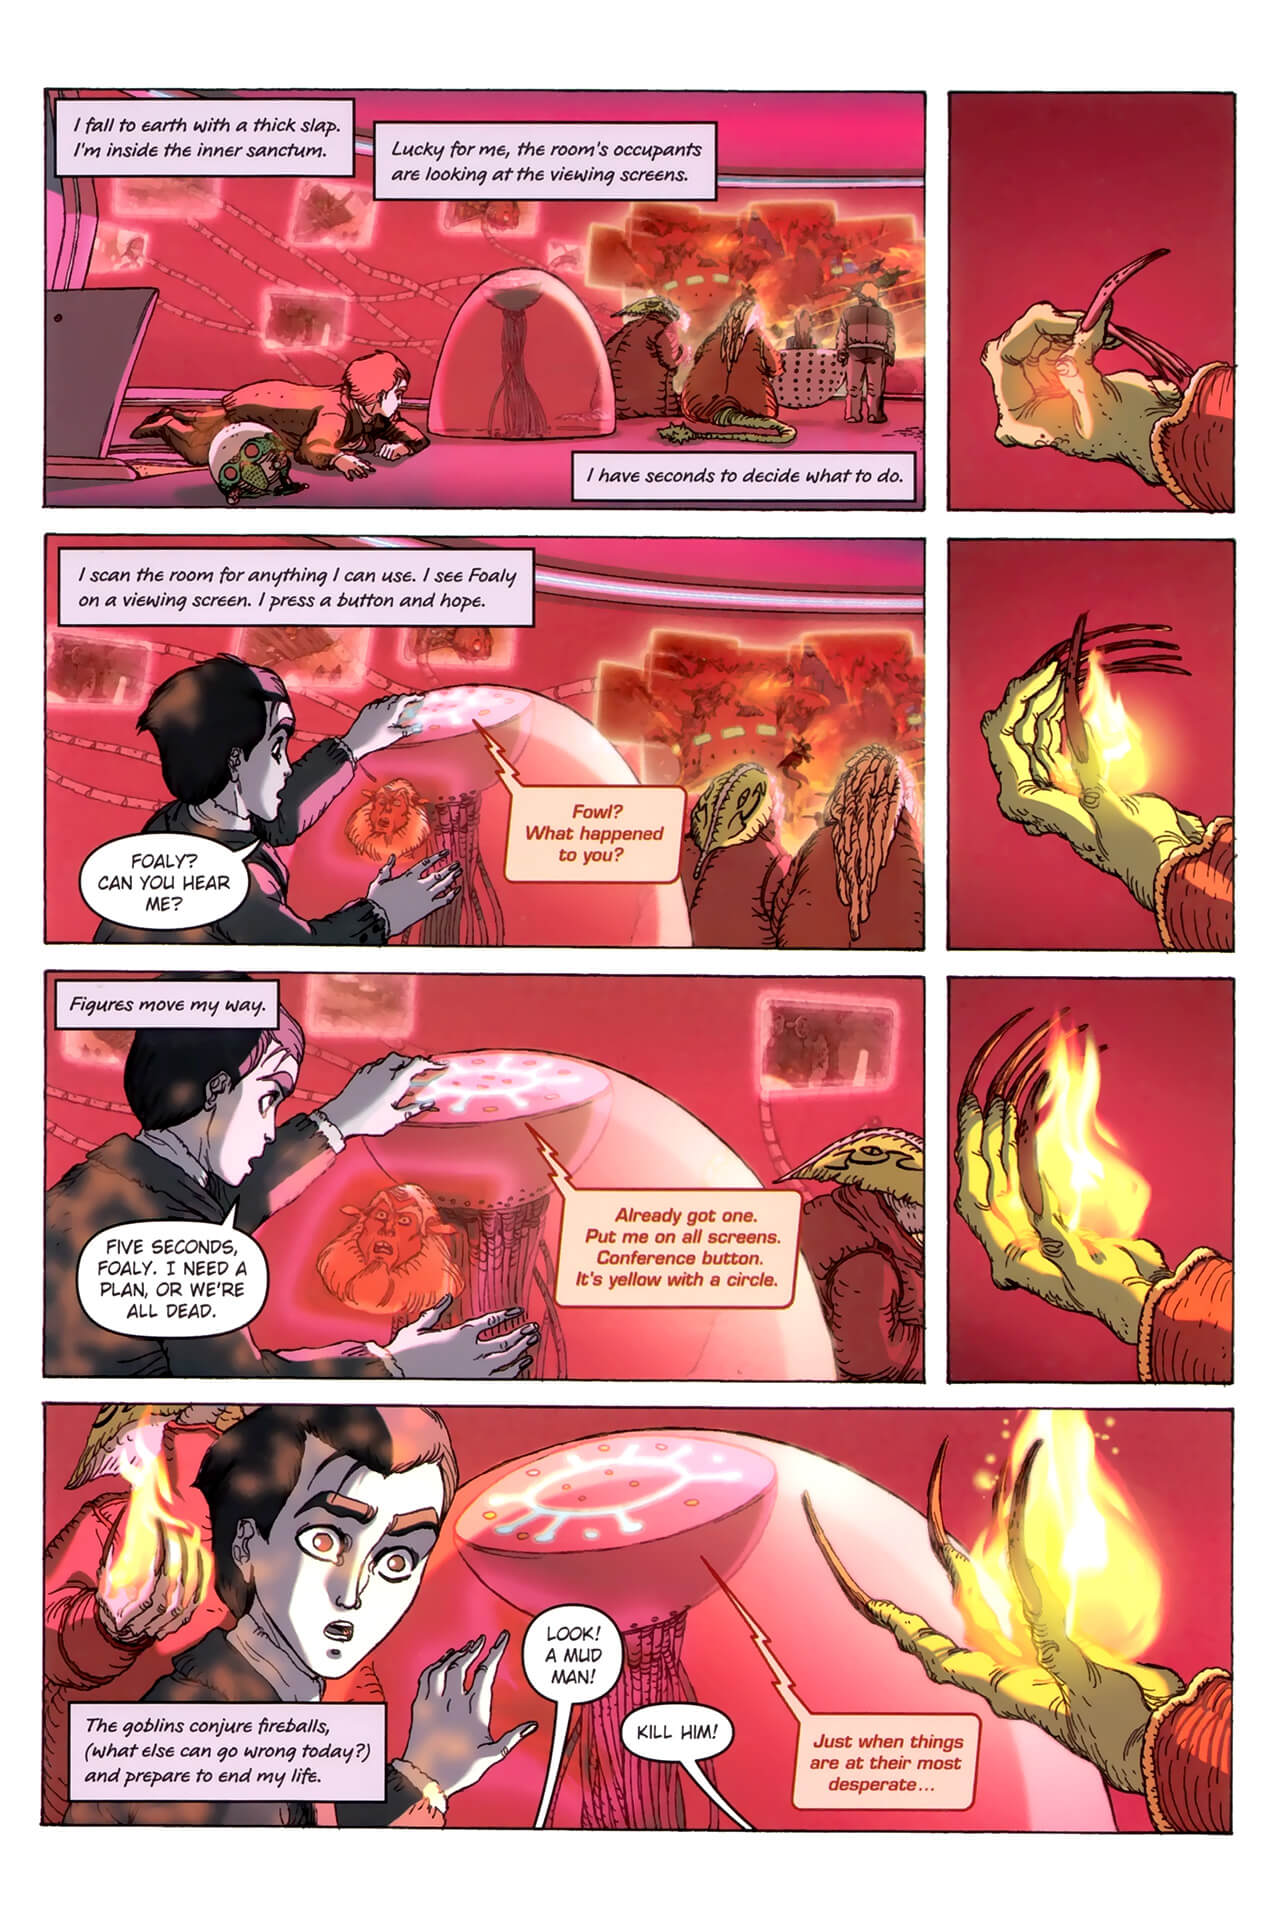 page 111 of artemis fowl the arctic incident graphic novel